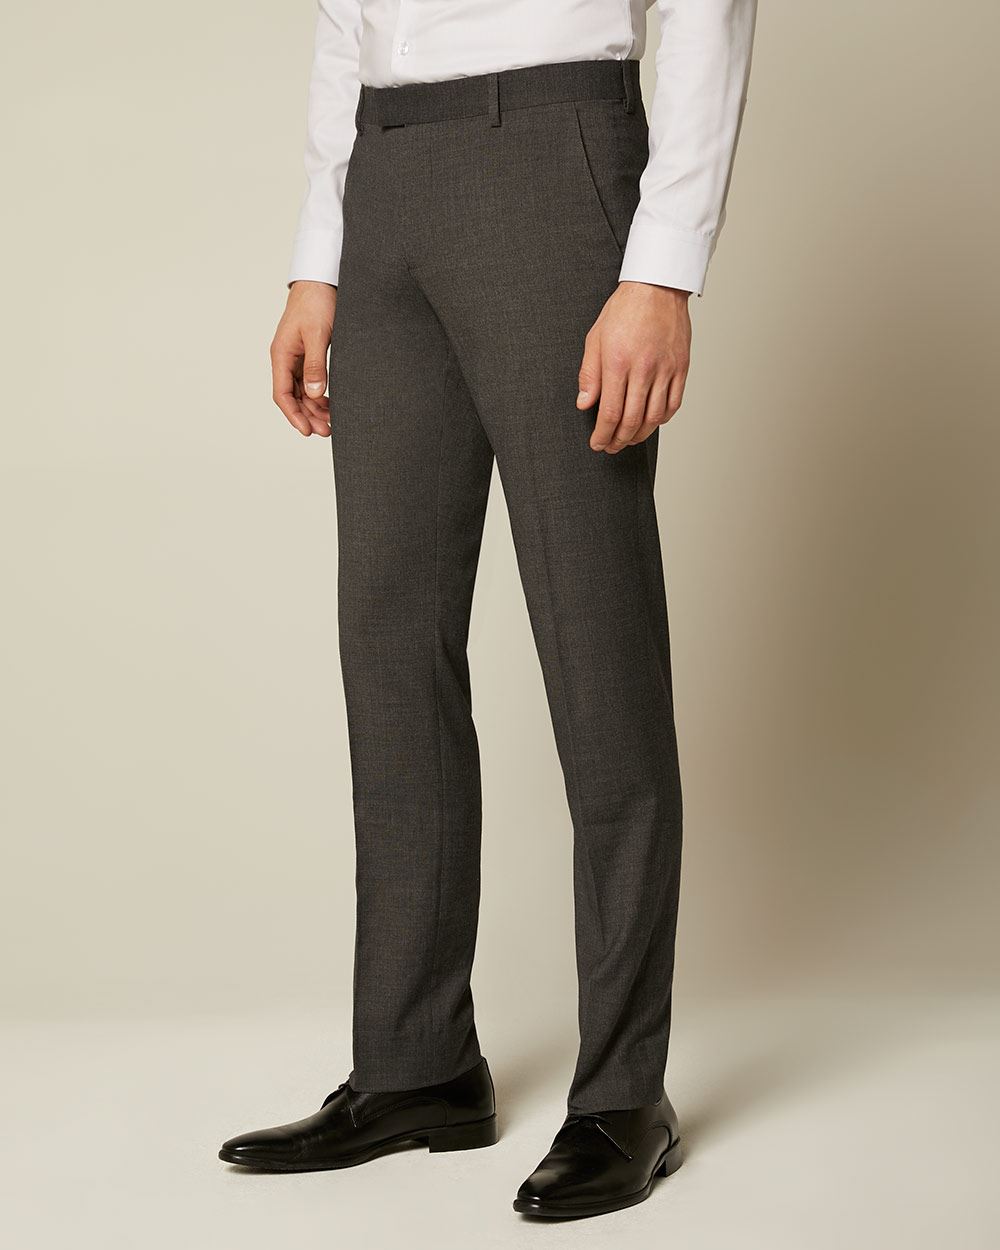 Essential Tailored Fit Dark Grey suit Pant | RW&CO.